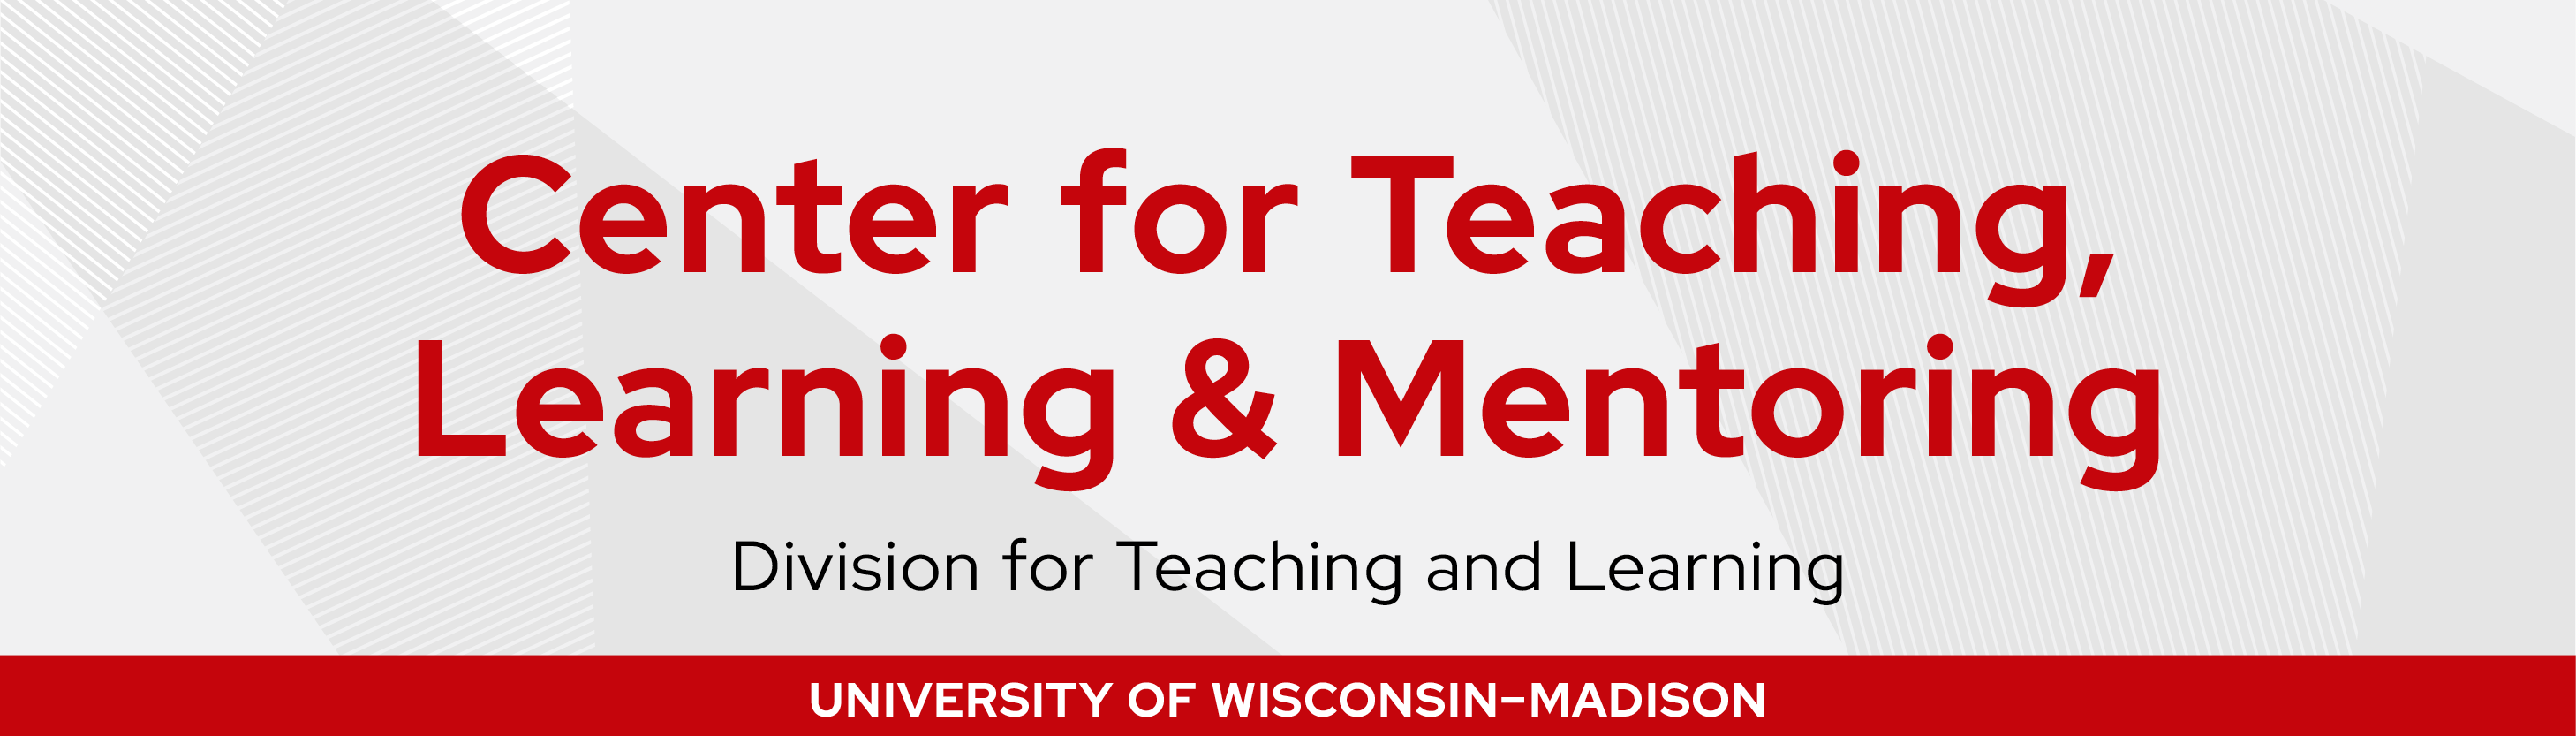 Center for Teaching, Learning & Mentoring. Division for Teaching and Learning.